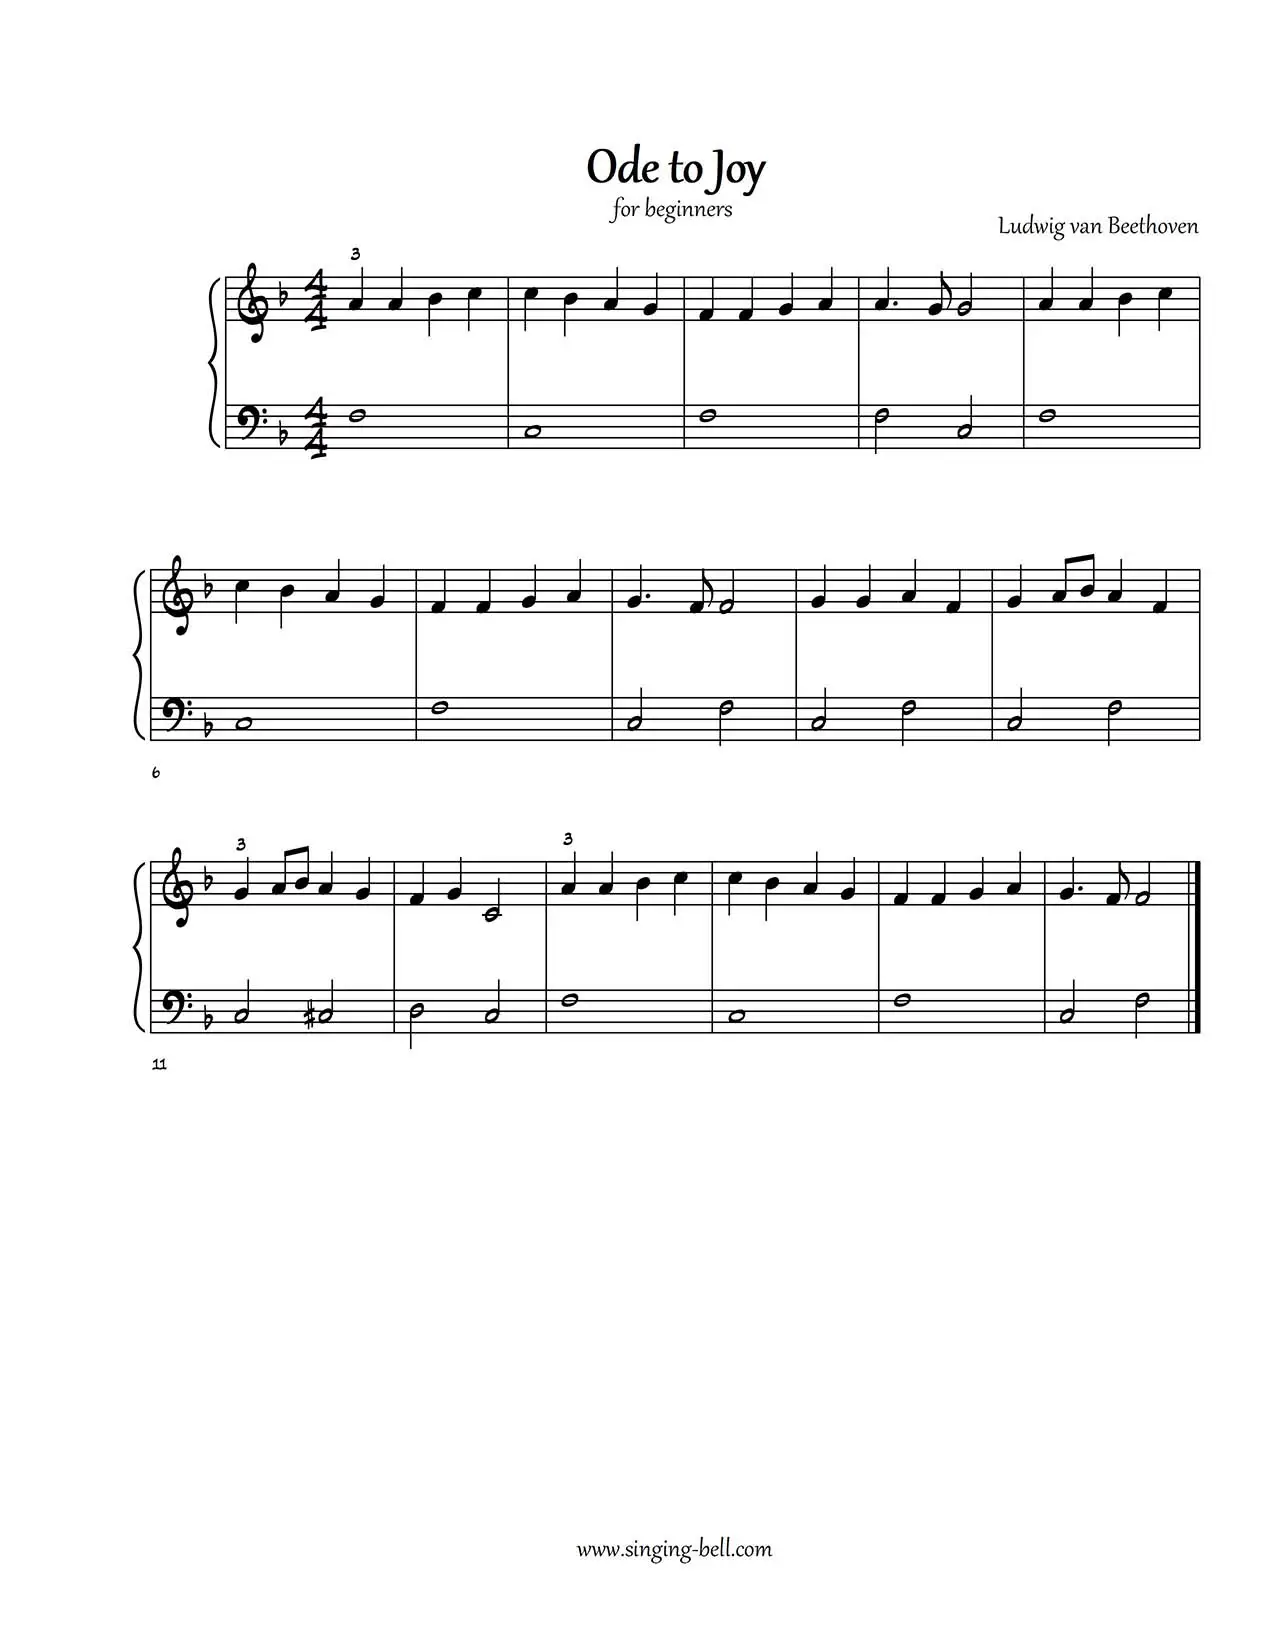 Ode to Joy easy piano sheet music notes beginners pdf in F